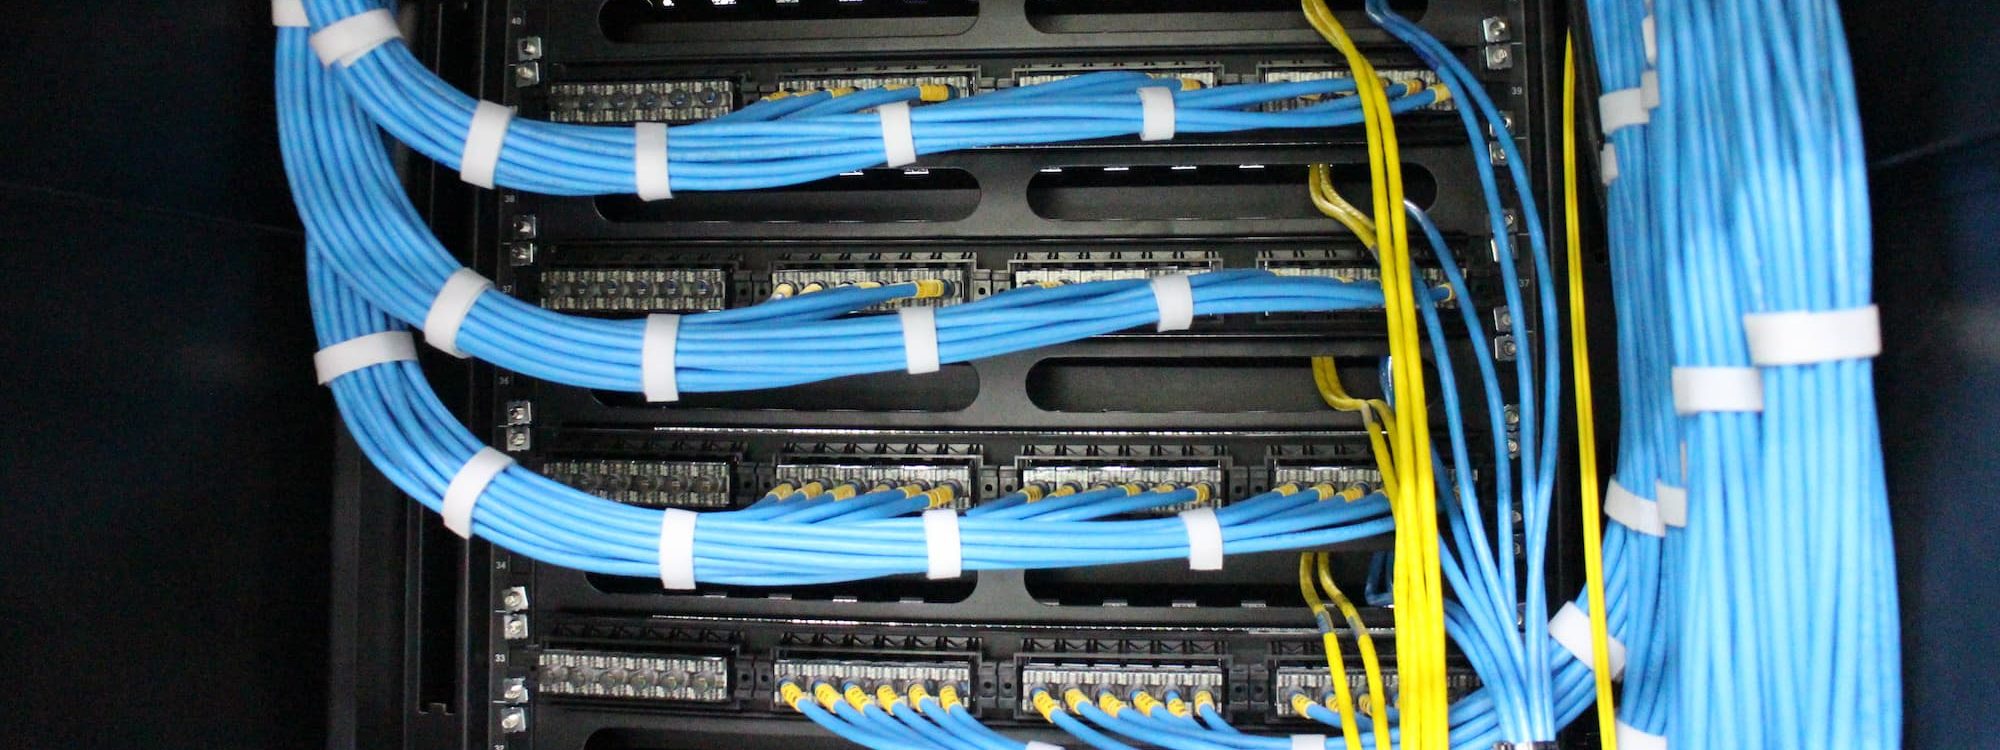 Networking cables in server rack